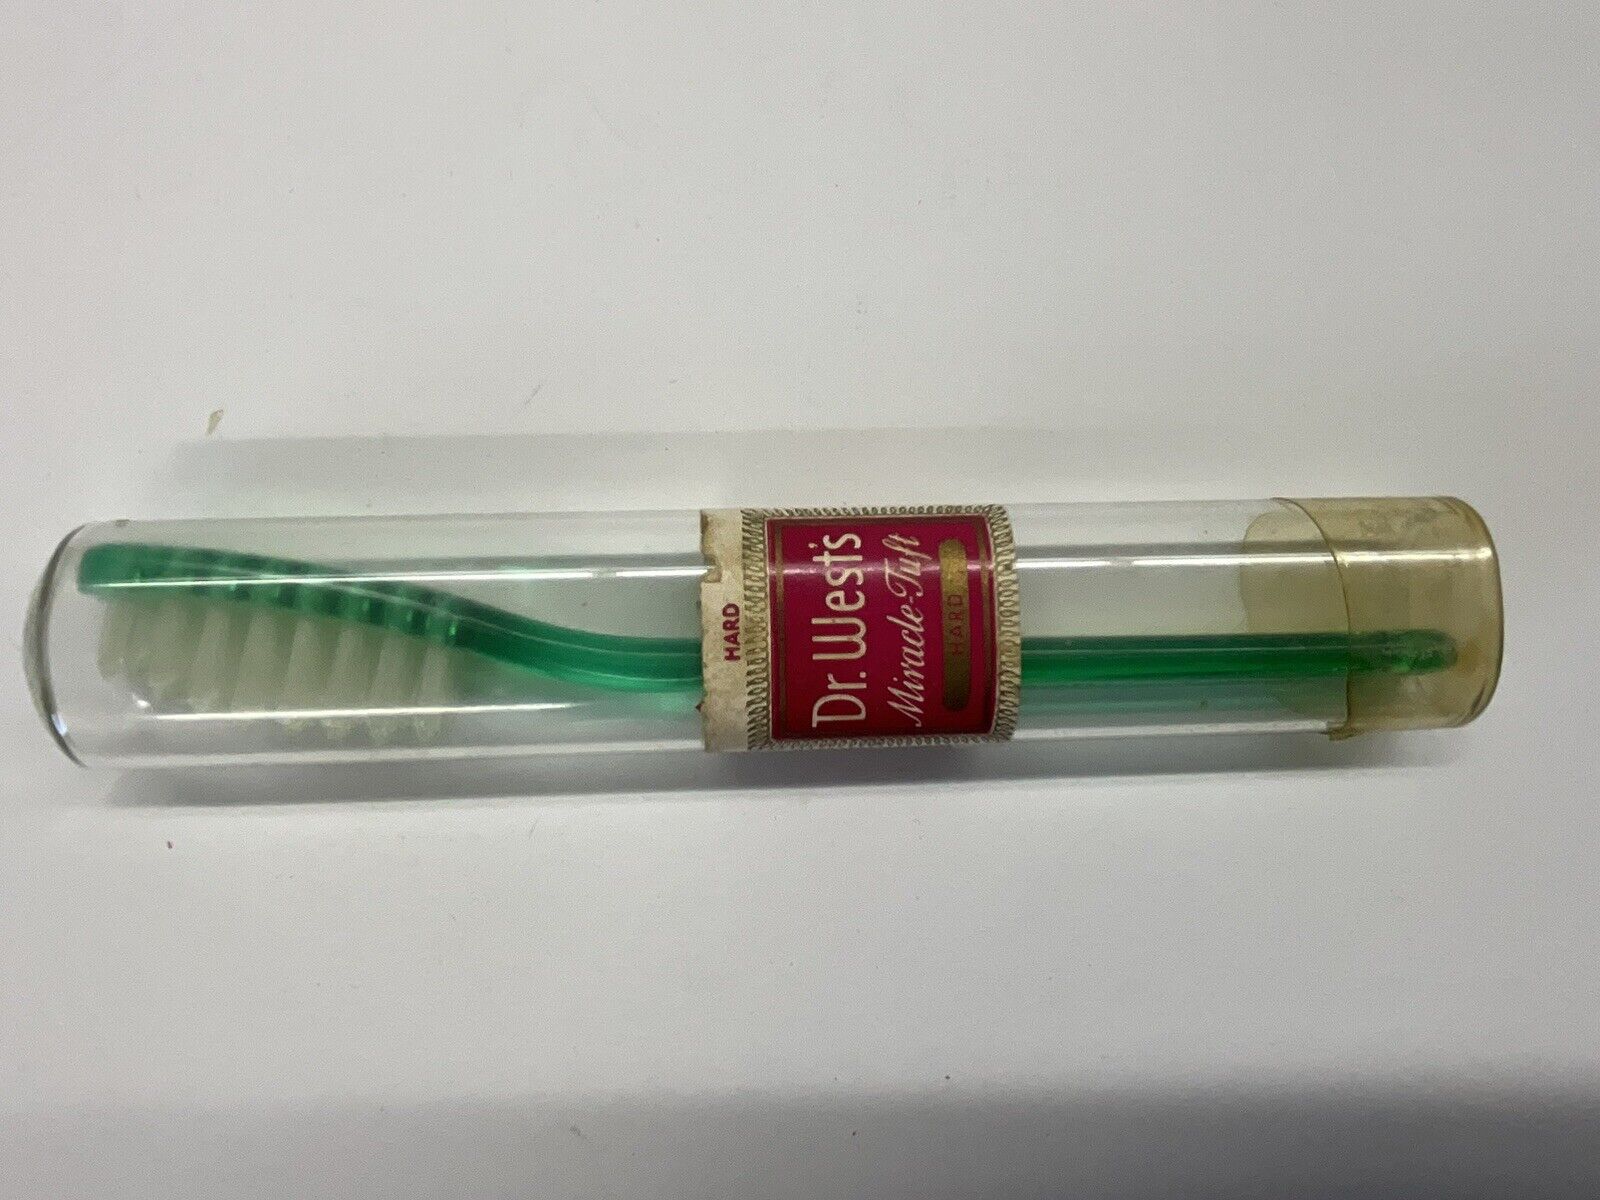 Vintage 1938 Dr. West’s Toothbrush Miracle Tuft Green Hard Bristles